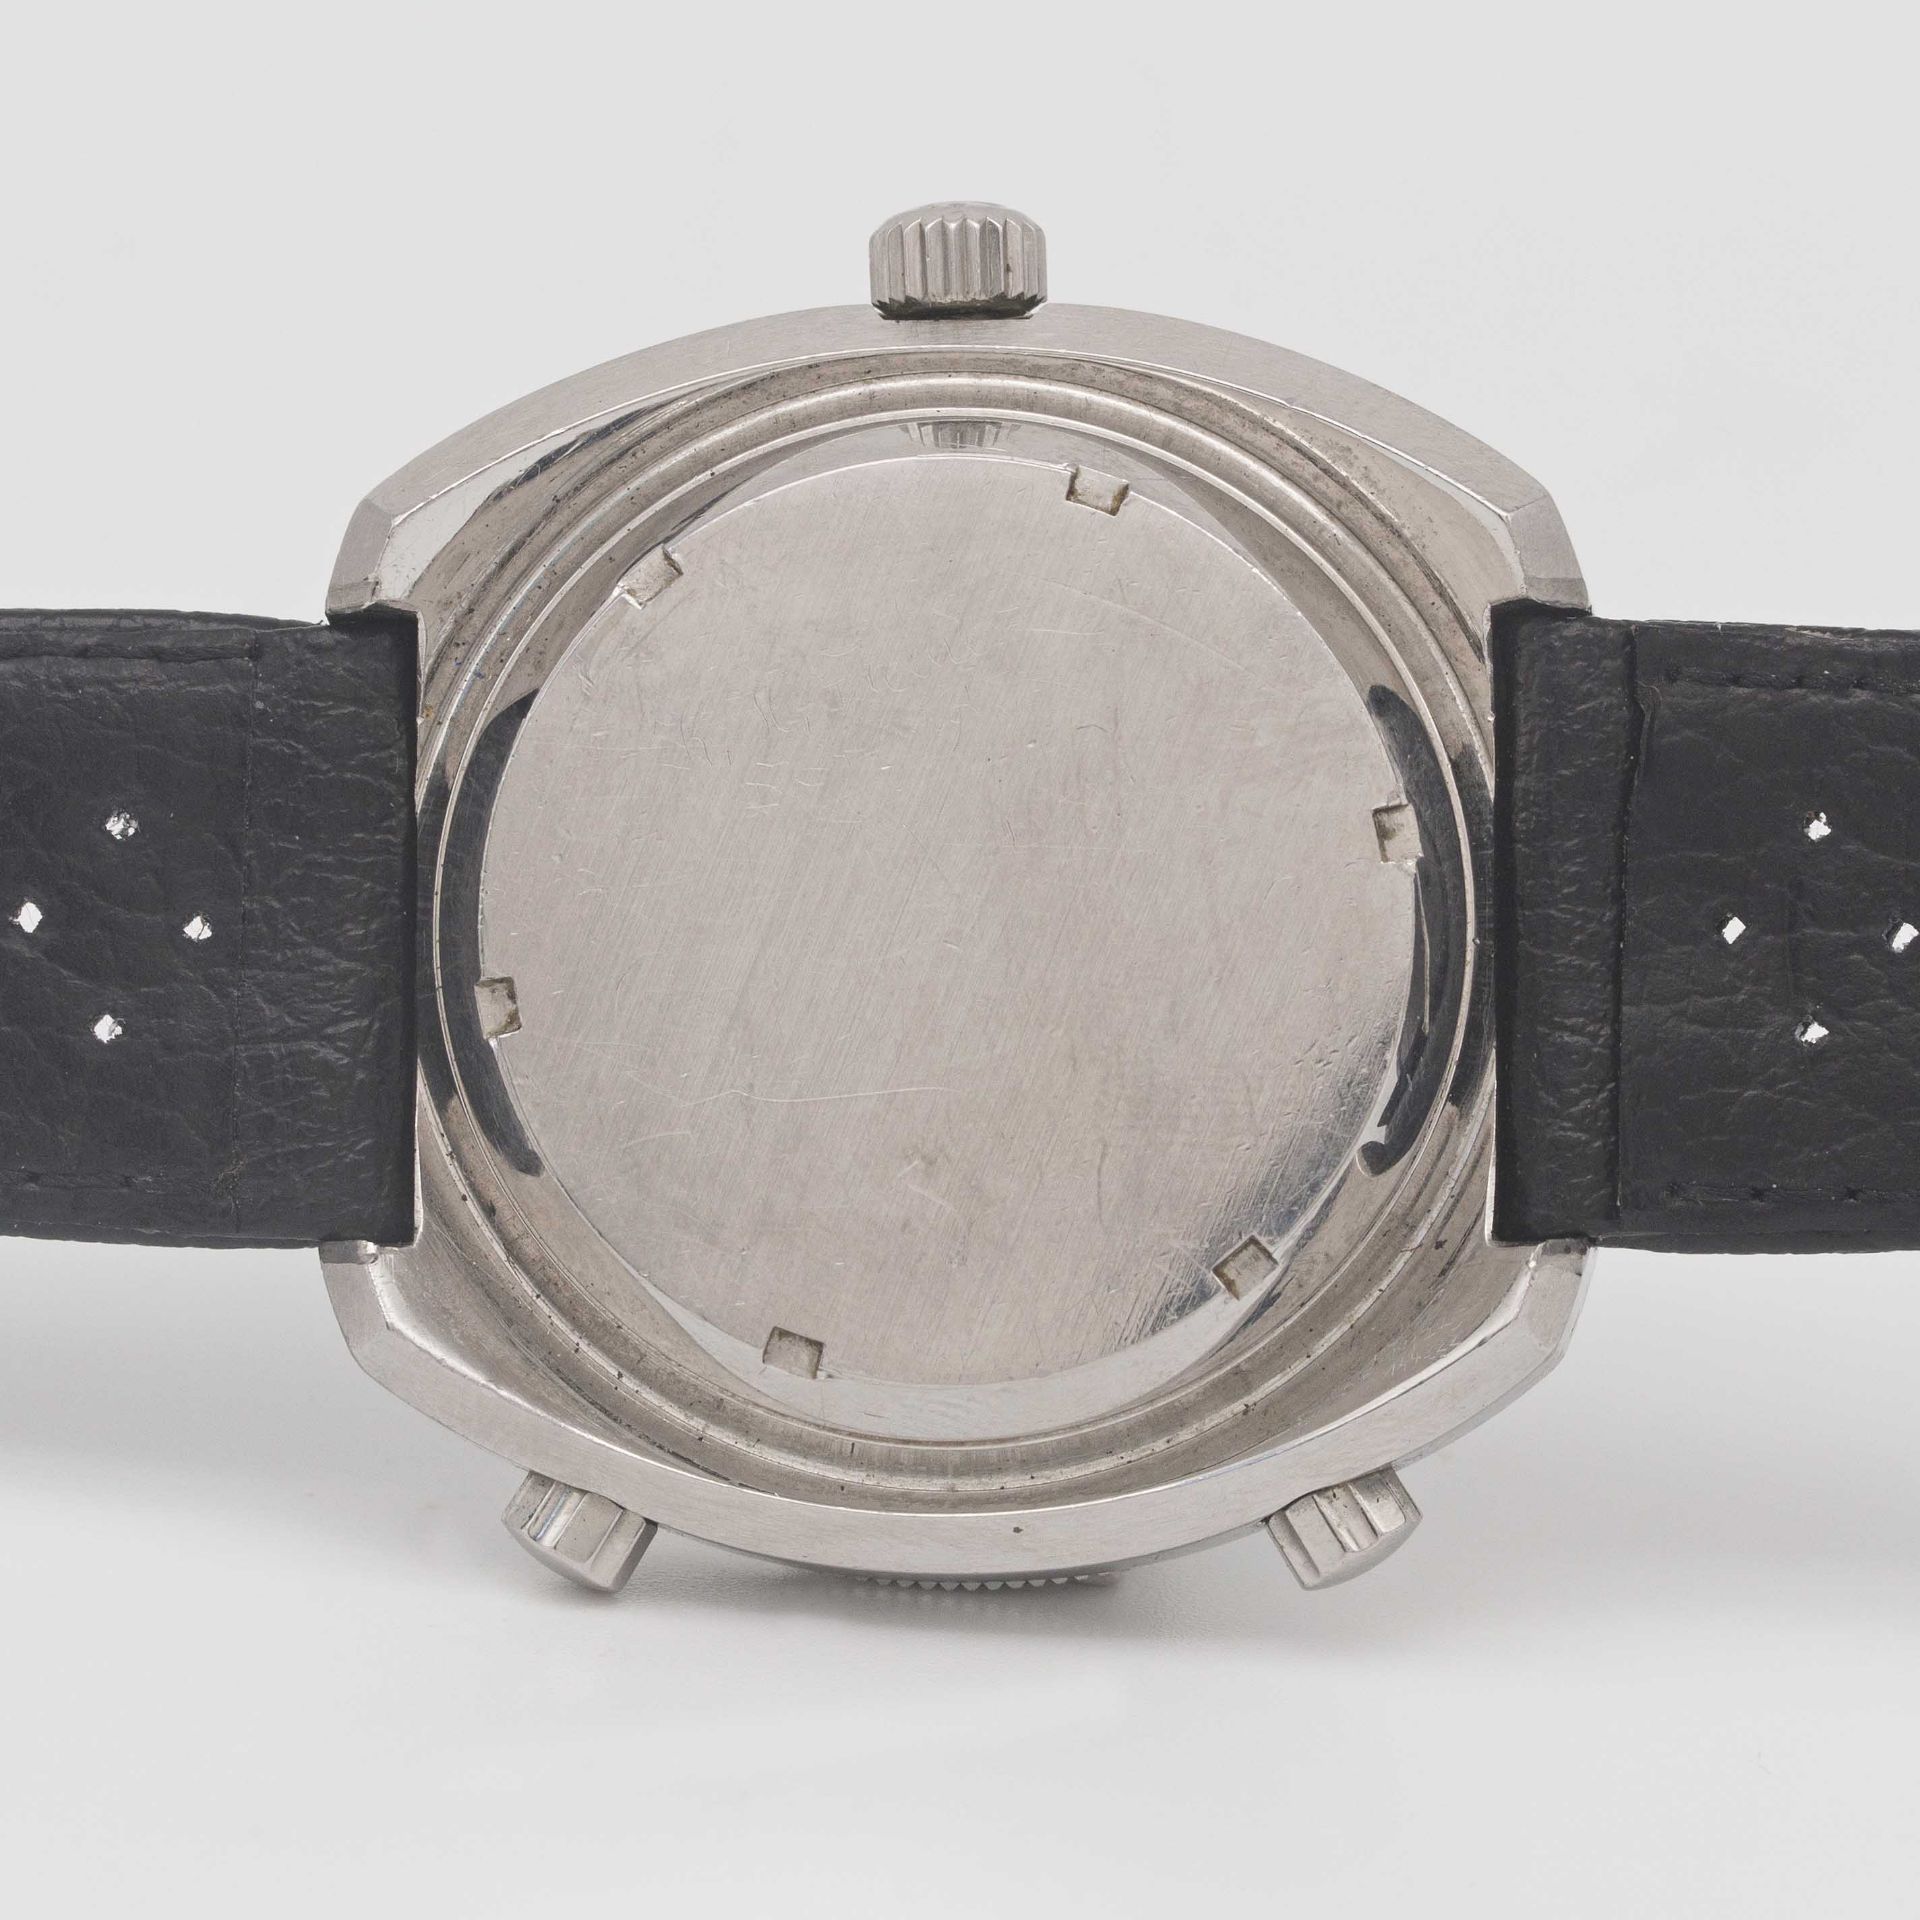 A GENTLEMAN'S STAINLESS STEEL HEUER CALCULATOR AUTOMATIC CHRONOGRAPH WRIST WATCH CIRCA 1970s, REF. - Image 6 of 8